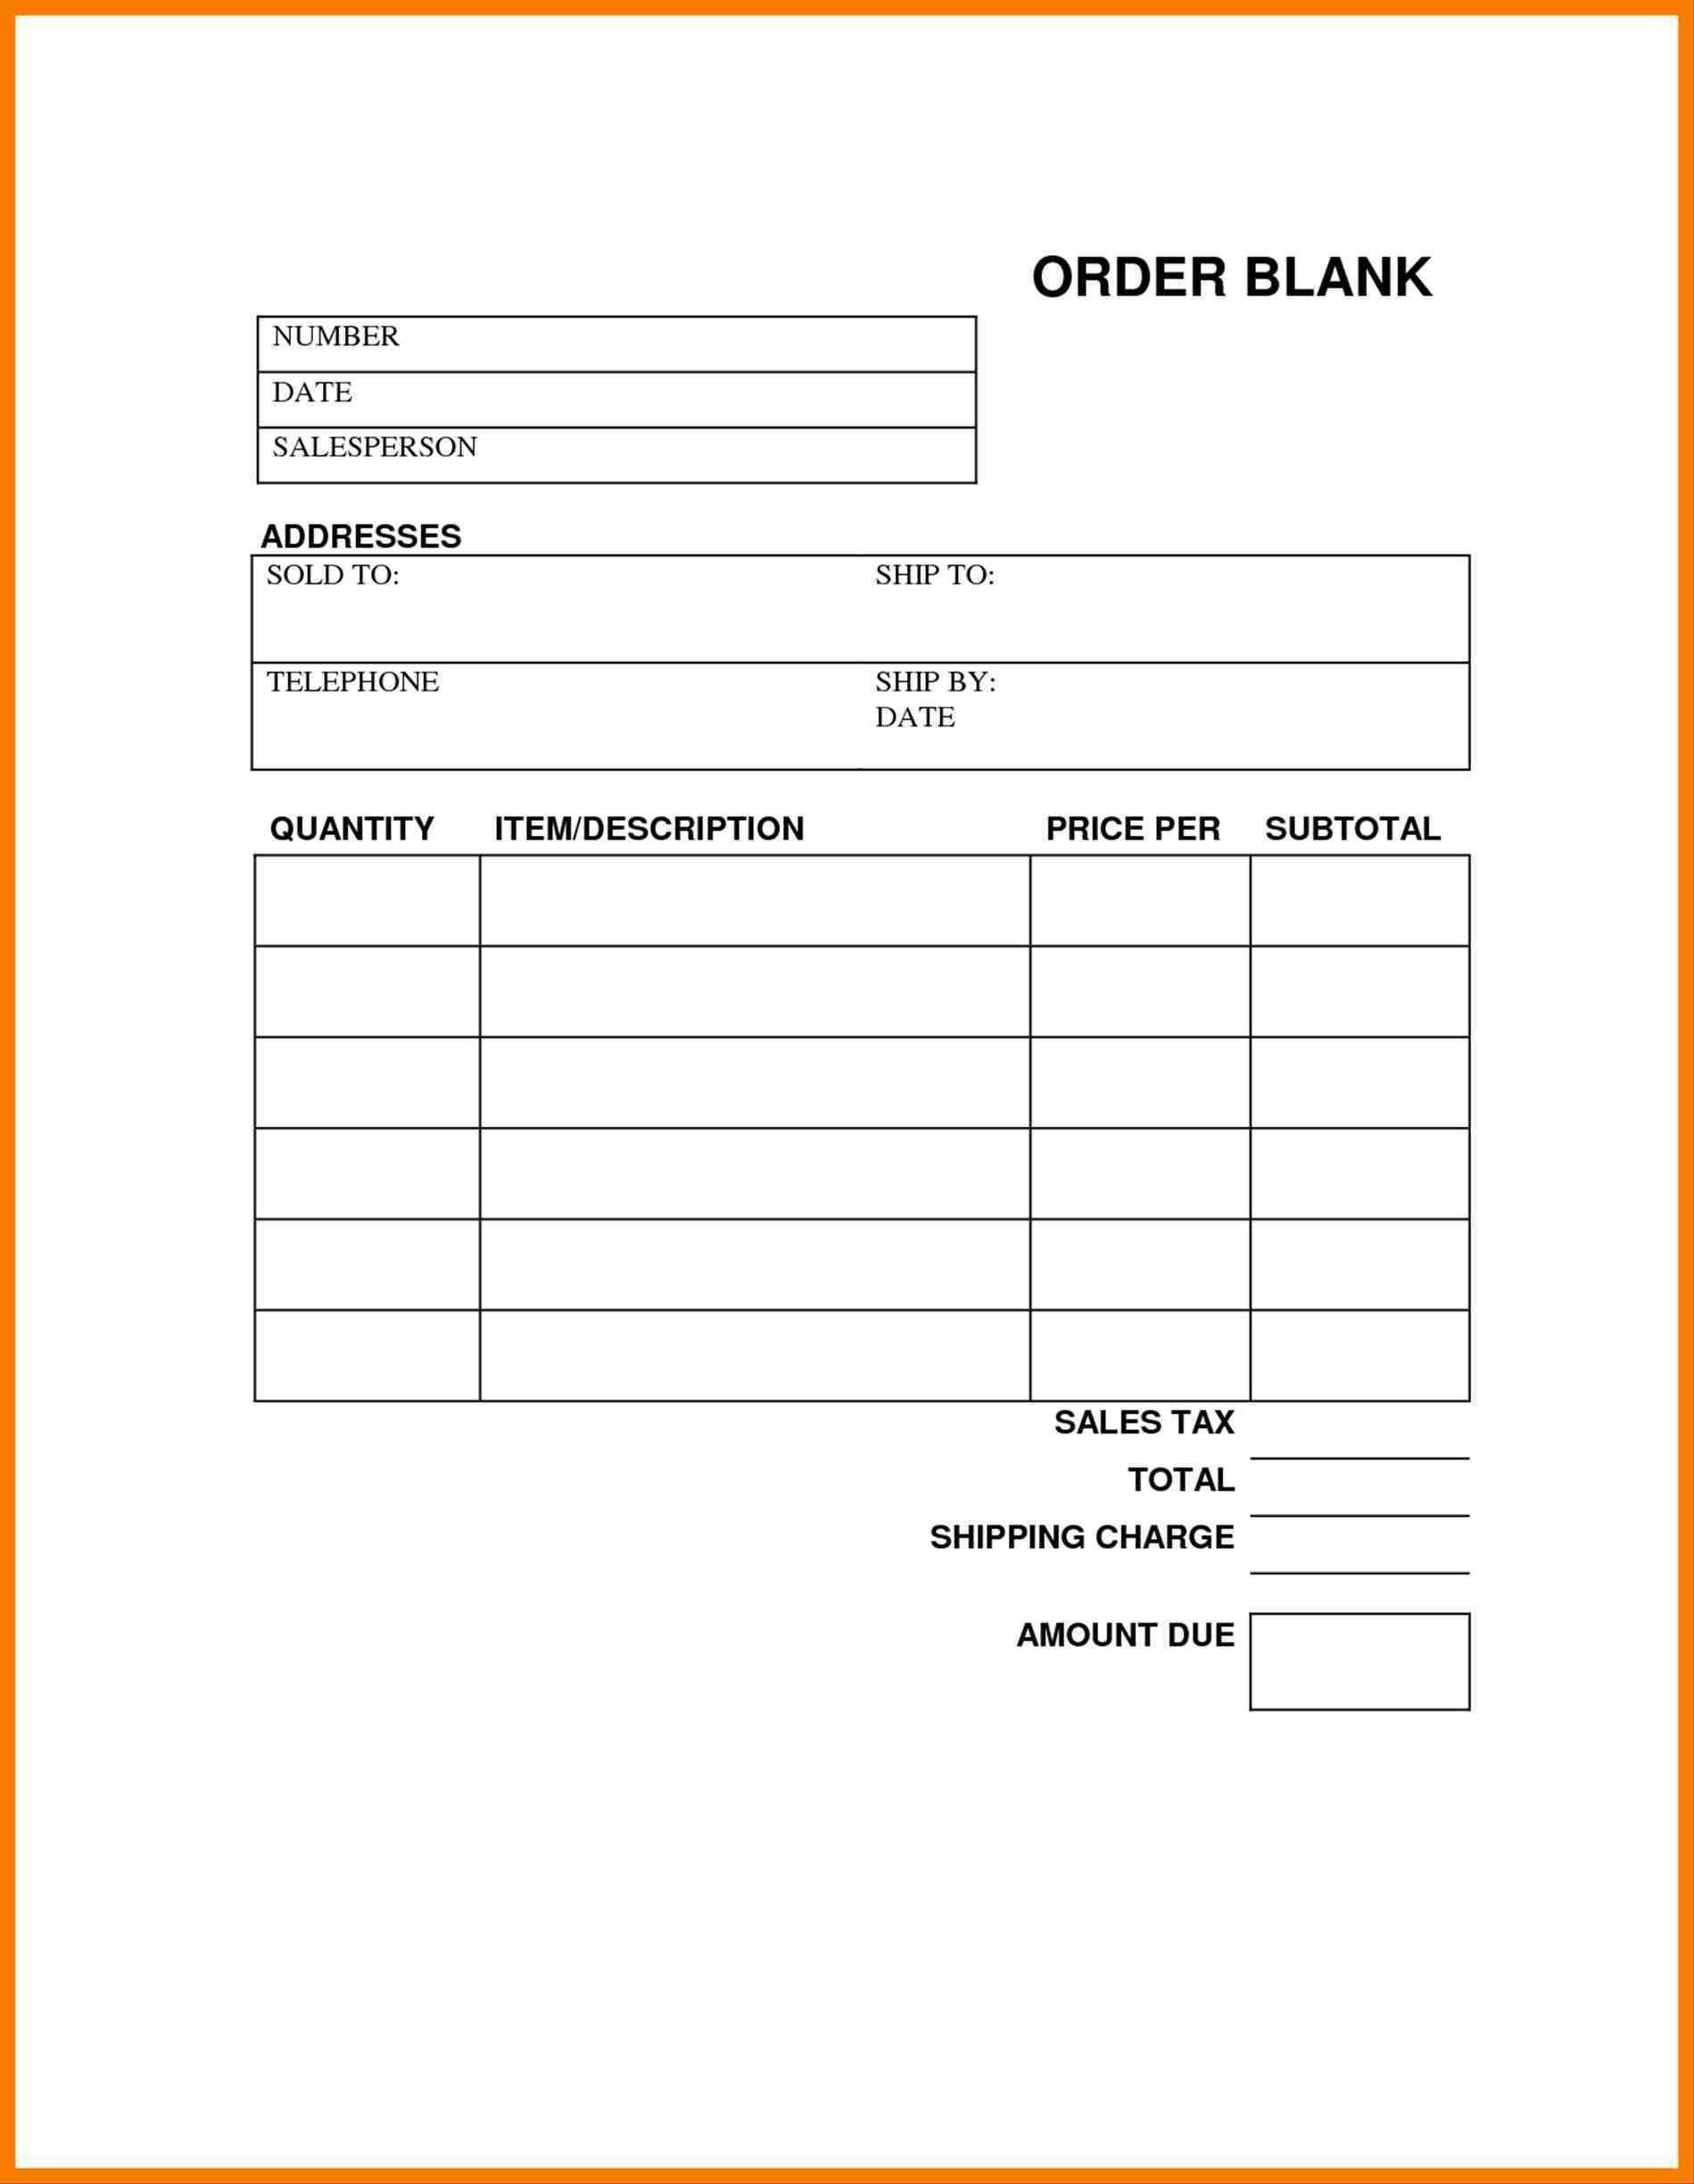 Blank Order Forms Templates Free | Free Tamplate | Order Form - Free Printable Blank Receipt Form